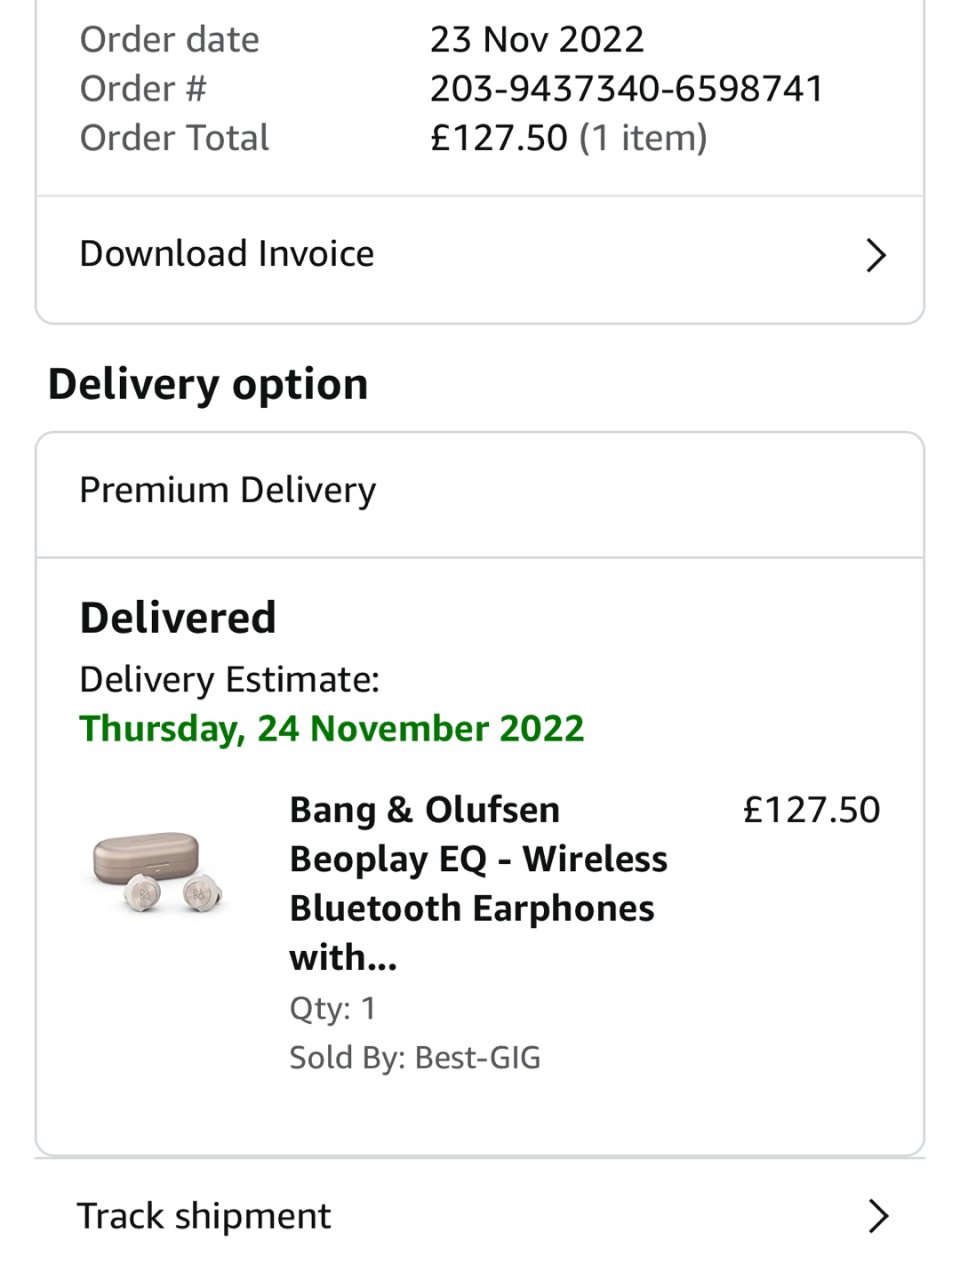 Bang & Olufsen Beoplay EQ - Wireless Bluetooth Earphones with Microphone and Active Noise Cancelling, Up to 20 hours of Playtime, Sand: Amazon.co.uk: Musical Instruments & DJ